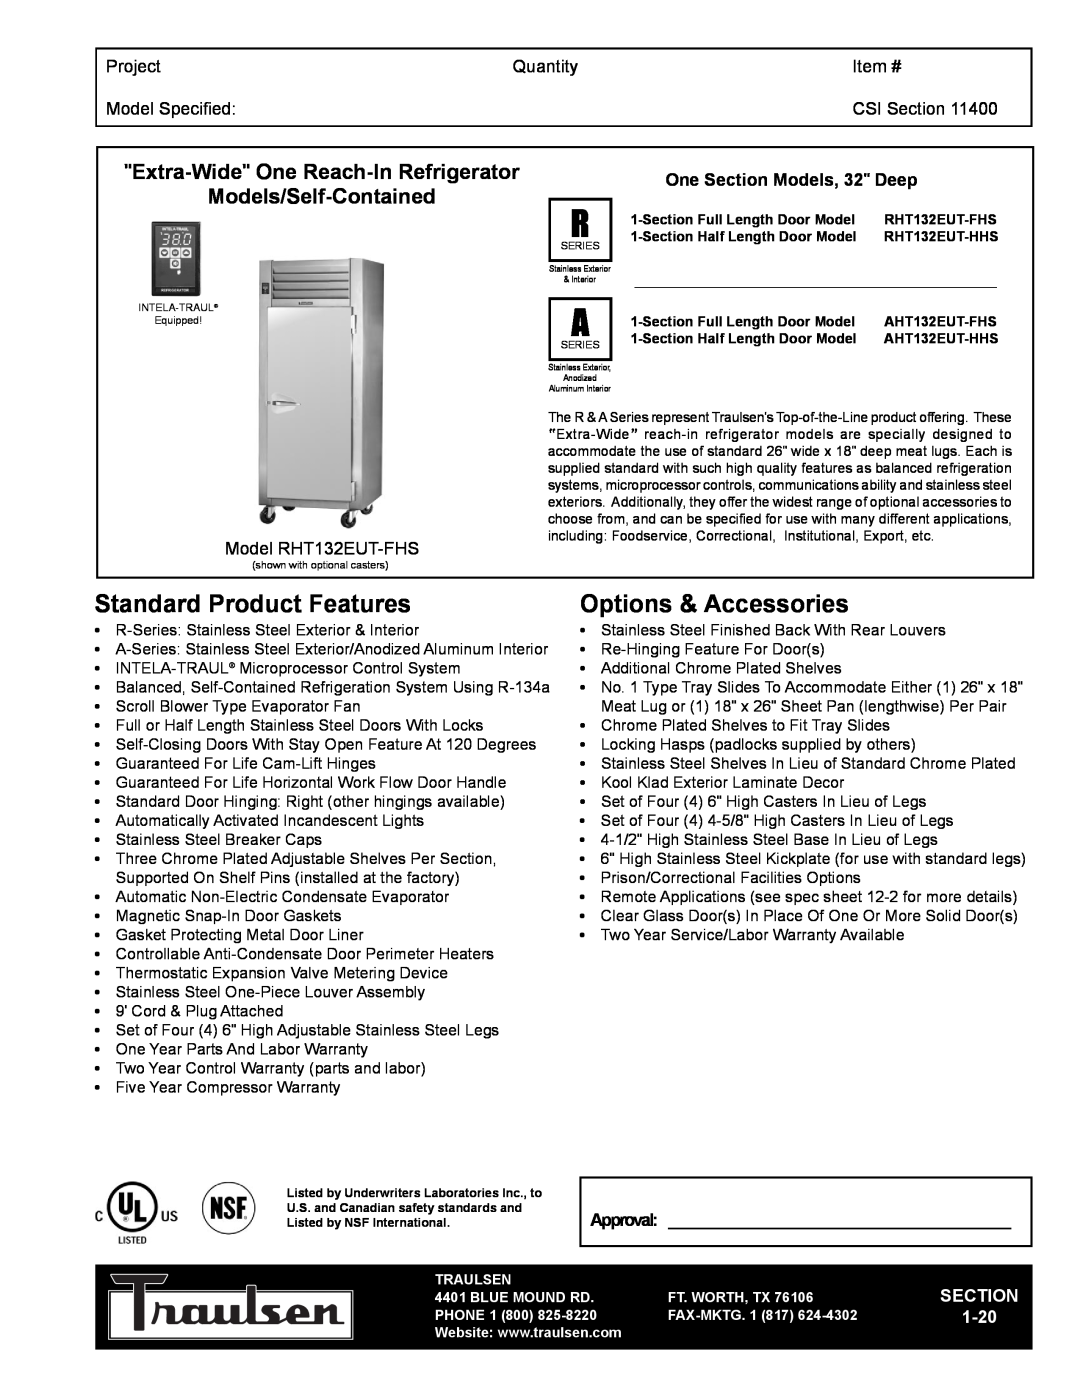 Traulsen RHT132EUT-FHS warranty Extra-Wide One Reach-InRefrigerator, Models/Self-Contained, Project, Quantity, Item # 